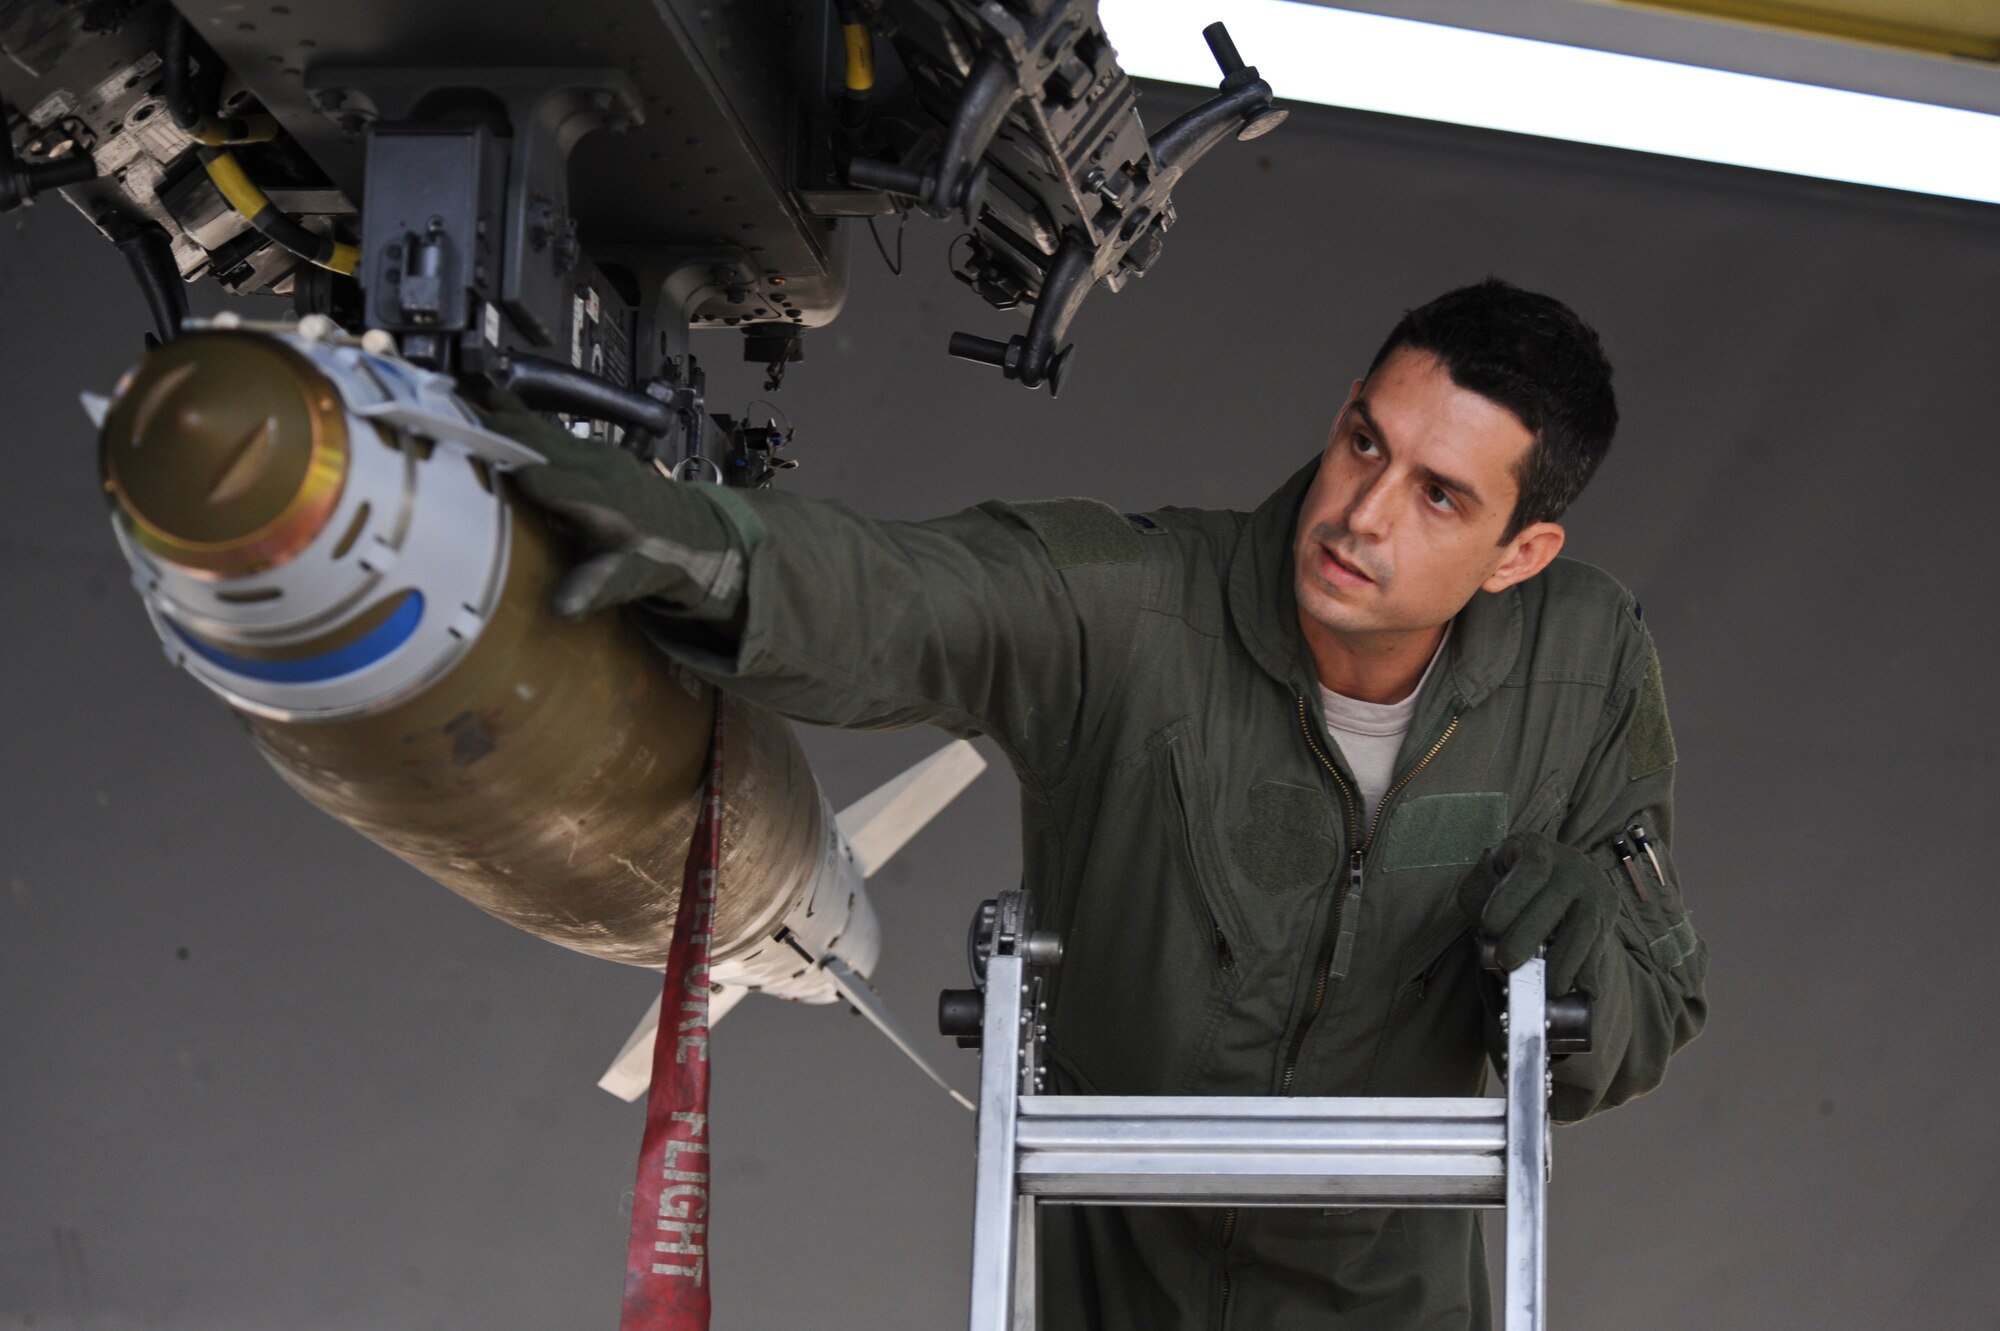 1st Lt. Justin Silva, 20th Bomb Squadron navigator, checks the serial number of a bomb on Barksdale Air Force Base, La., Aug. 15. Before a flight, aircrew members check the serial number and compare it to the weapons pre-flight checklist to ensure the correct munitions are loaded. Aircrews from Barksdale participated in Exercise Combat Hammer. The exercise is used to evaluate the employment of precision guided munitions to ensure the weapons are fully functional and mission capable. (U.S. Air Force photo/Airman 1st Class Micaiah Anthony)(RELEASED)